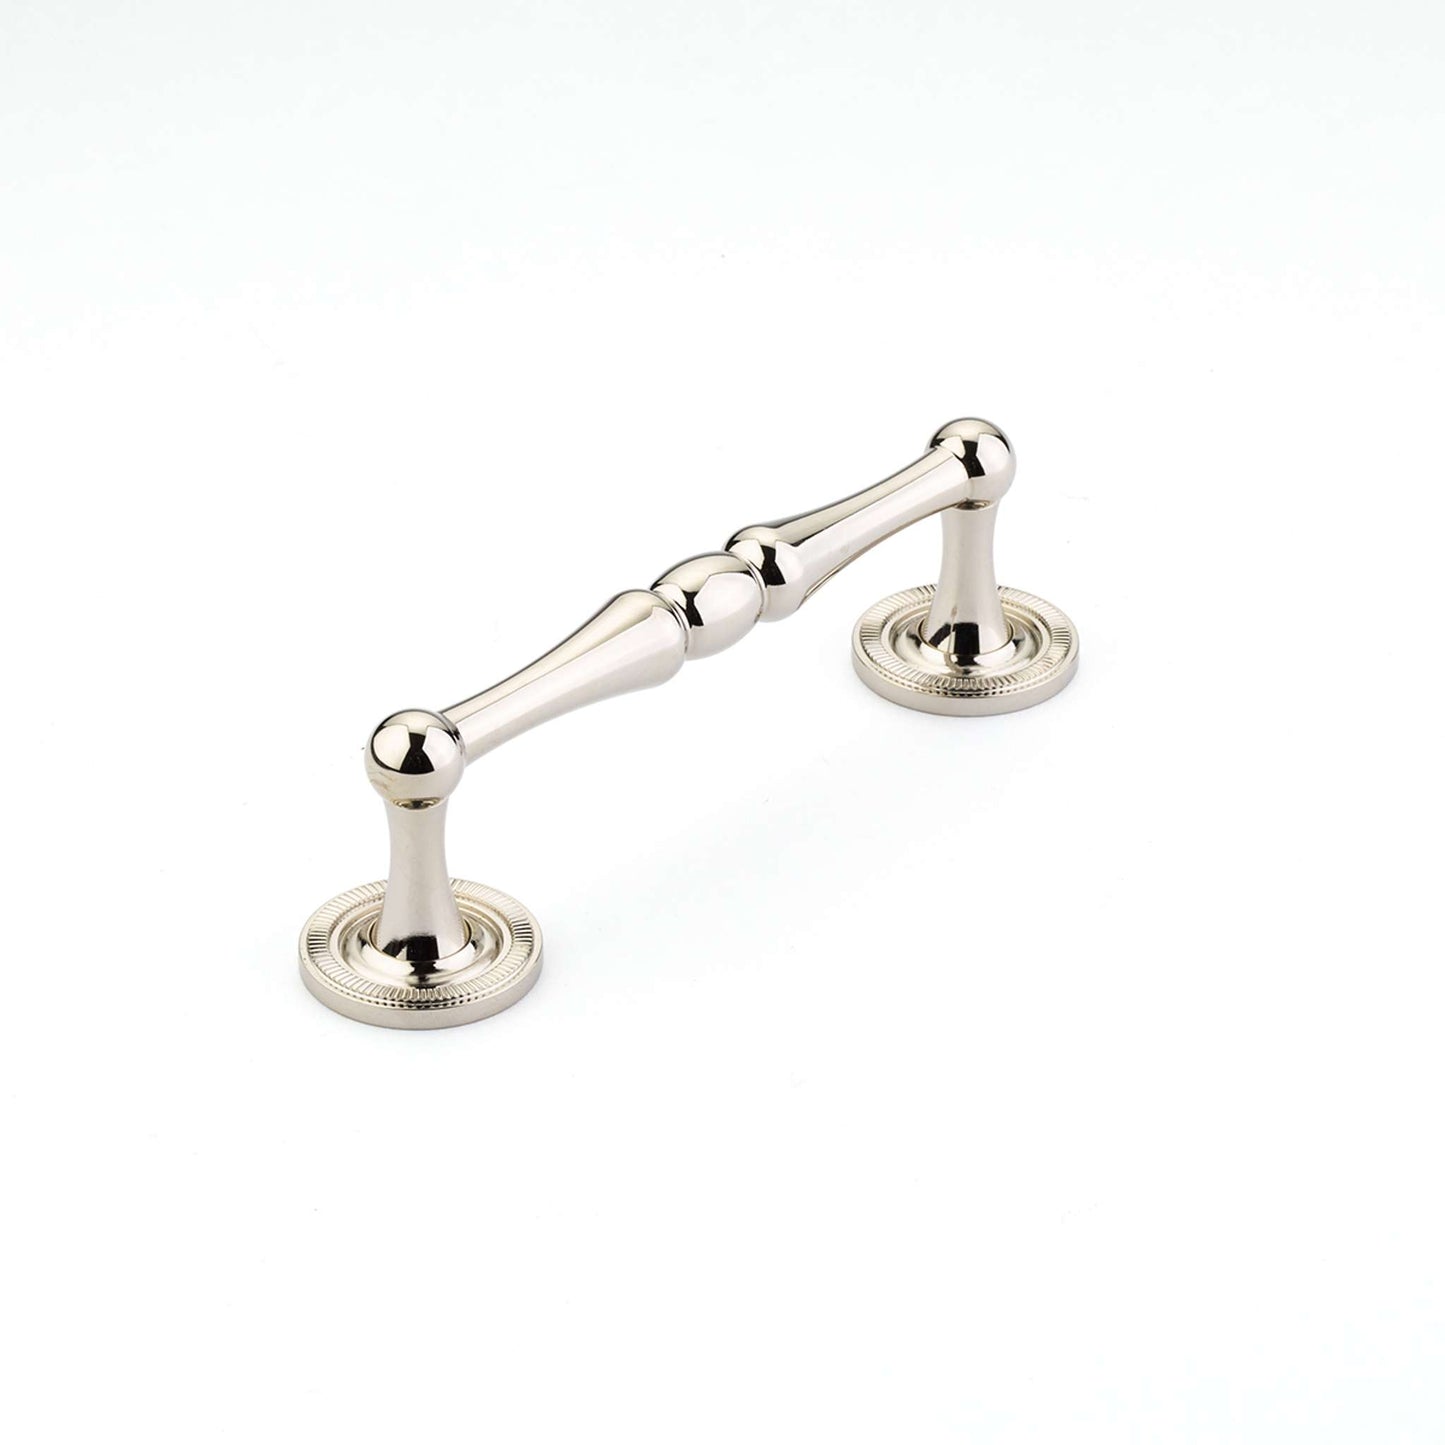 Schaub and Company - Atherton Cabinet Pull Knurled Footplates